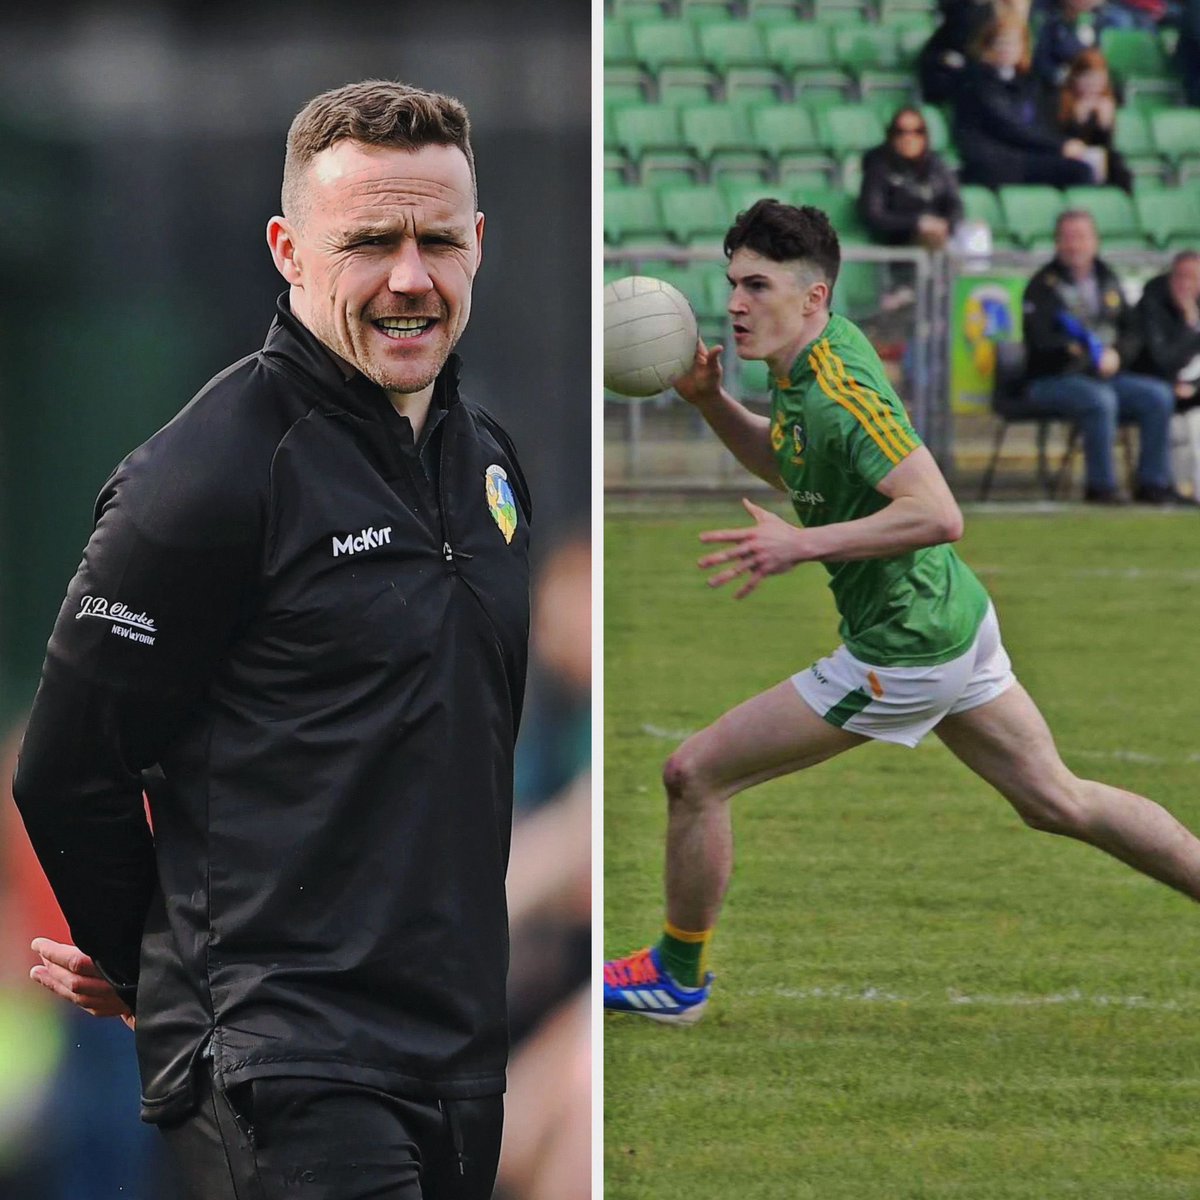 Leitrim U20s beat Mayo in the Connacht Championship Paul Honeyman scored 0-10 for Leitrim Under-20 footballers as they beat Mayo on a scoreline of 3-12 to 0-16. Mayo native Andy Moran is currently manager of Leitrim at both Senior and Under-20 level @EirGrid _…